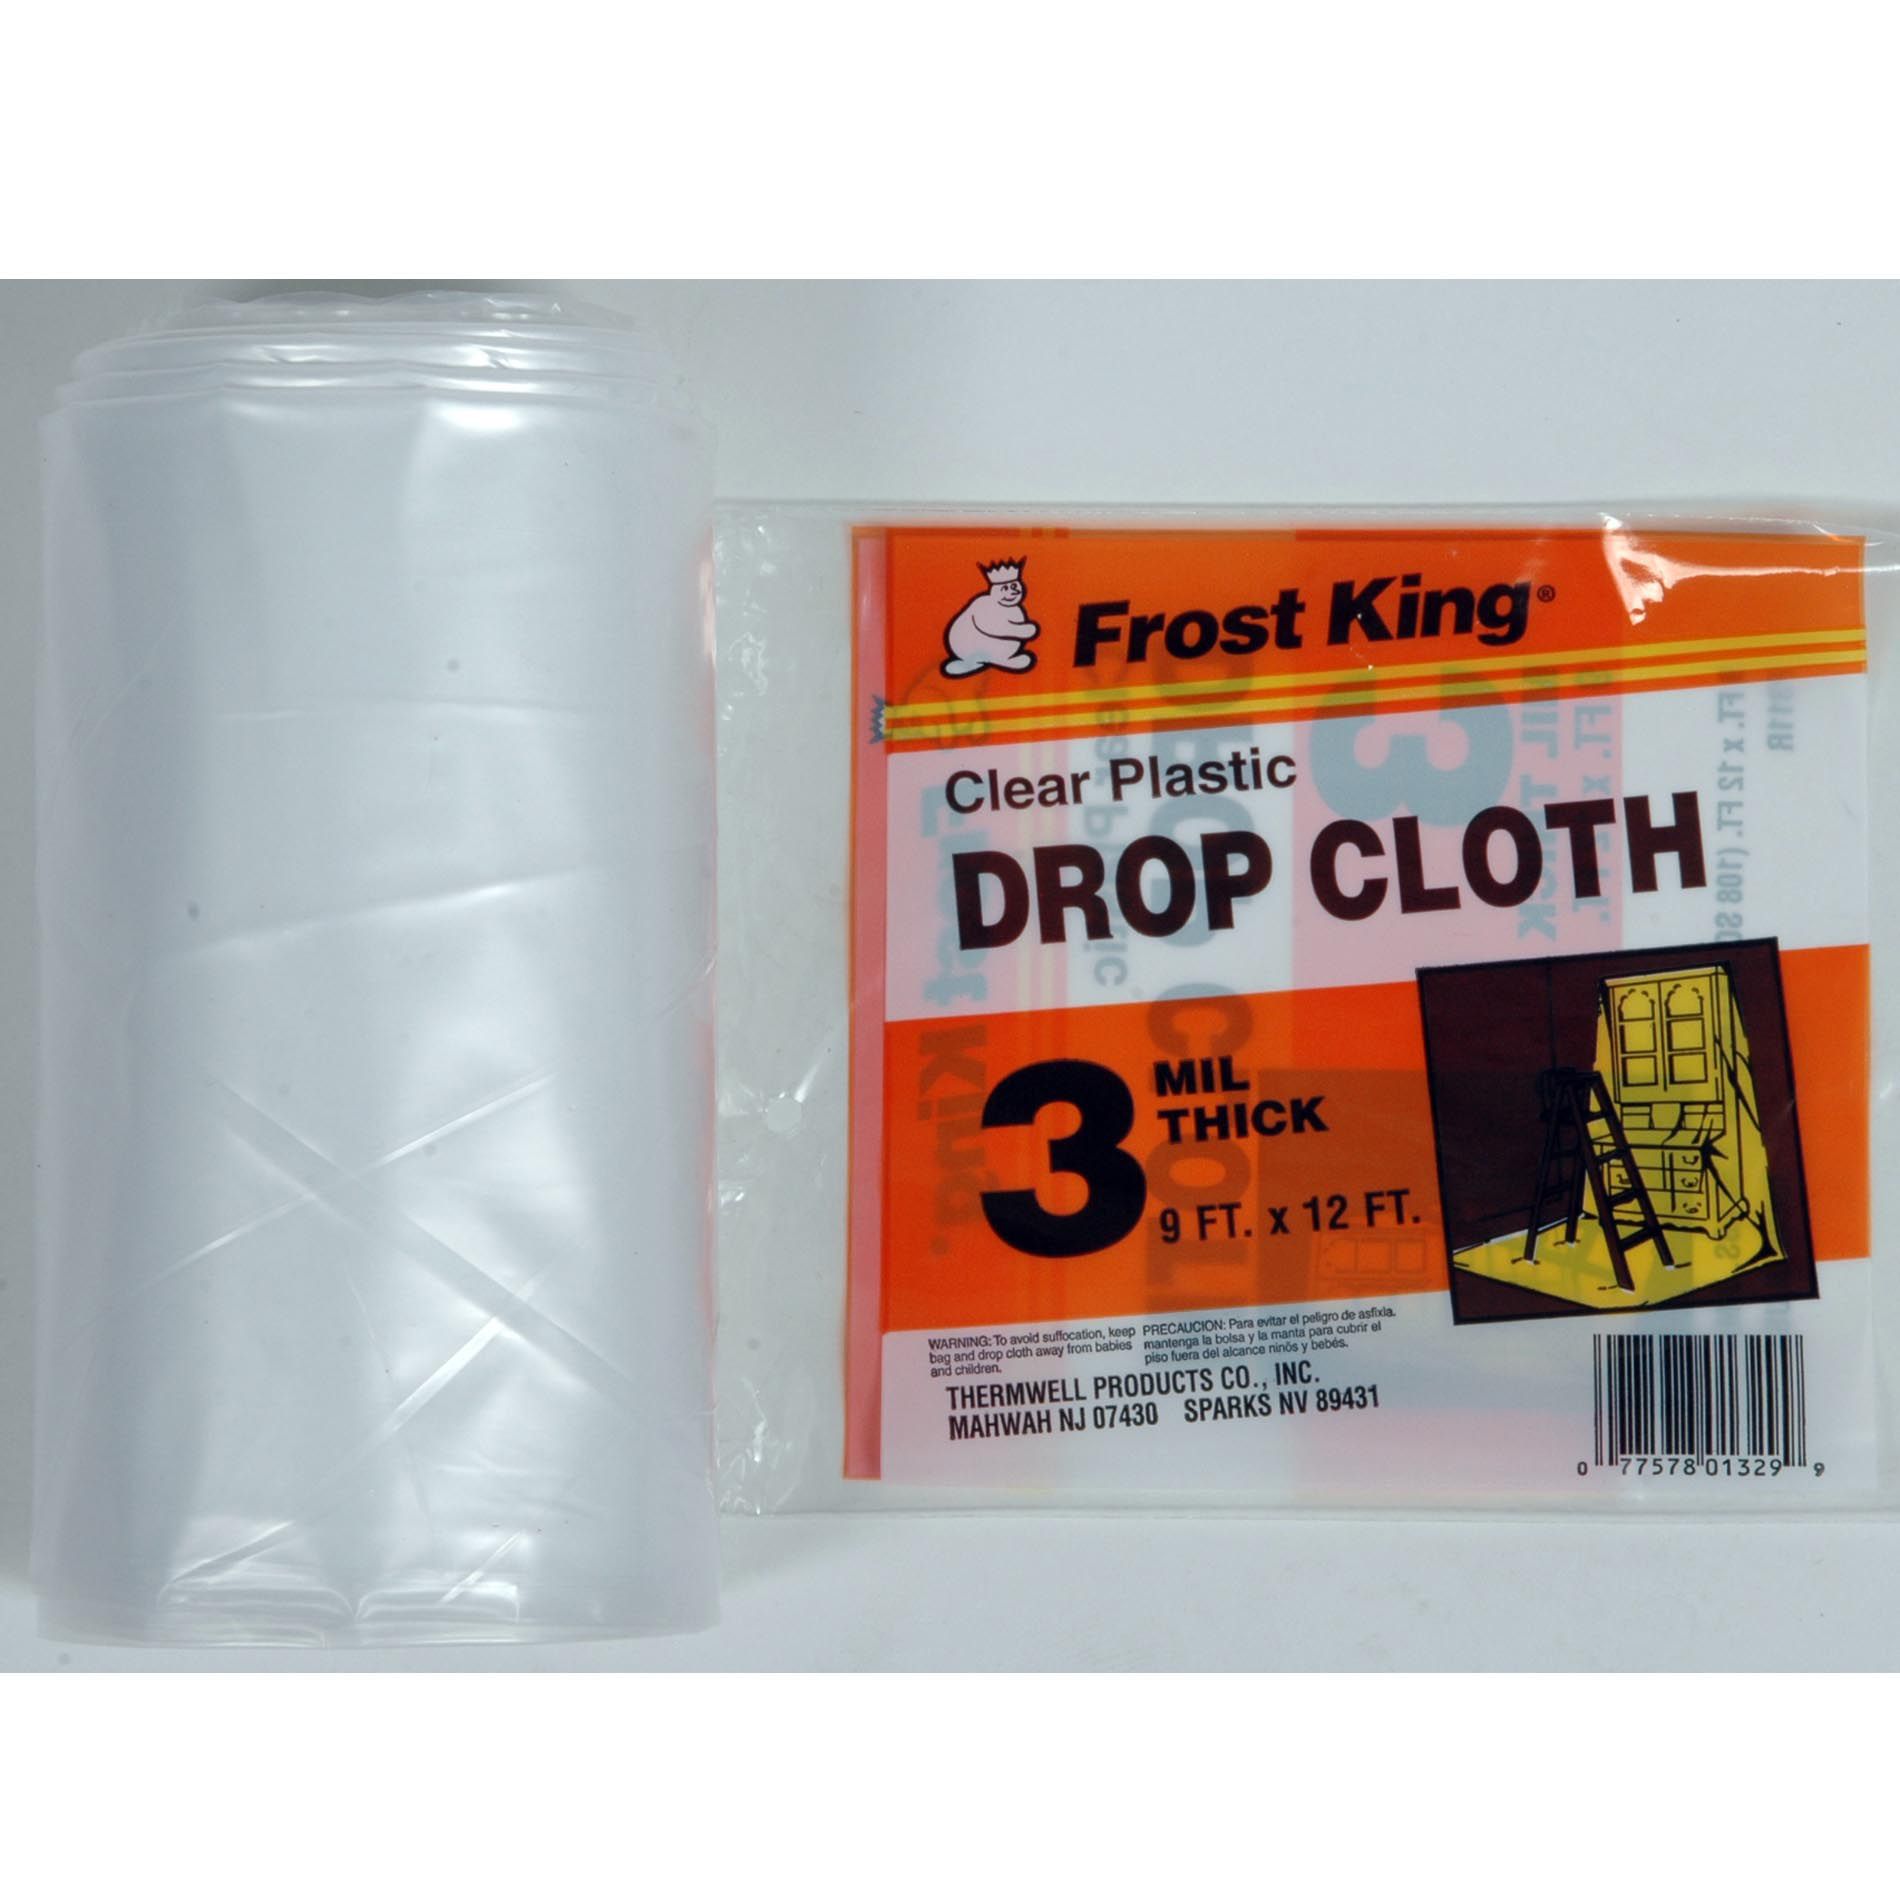 Frost King Extra Heavy Weight Plastic Drop Cloth, 9  x 12 ft. - Clear